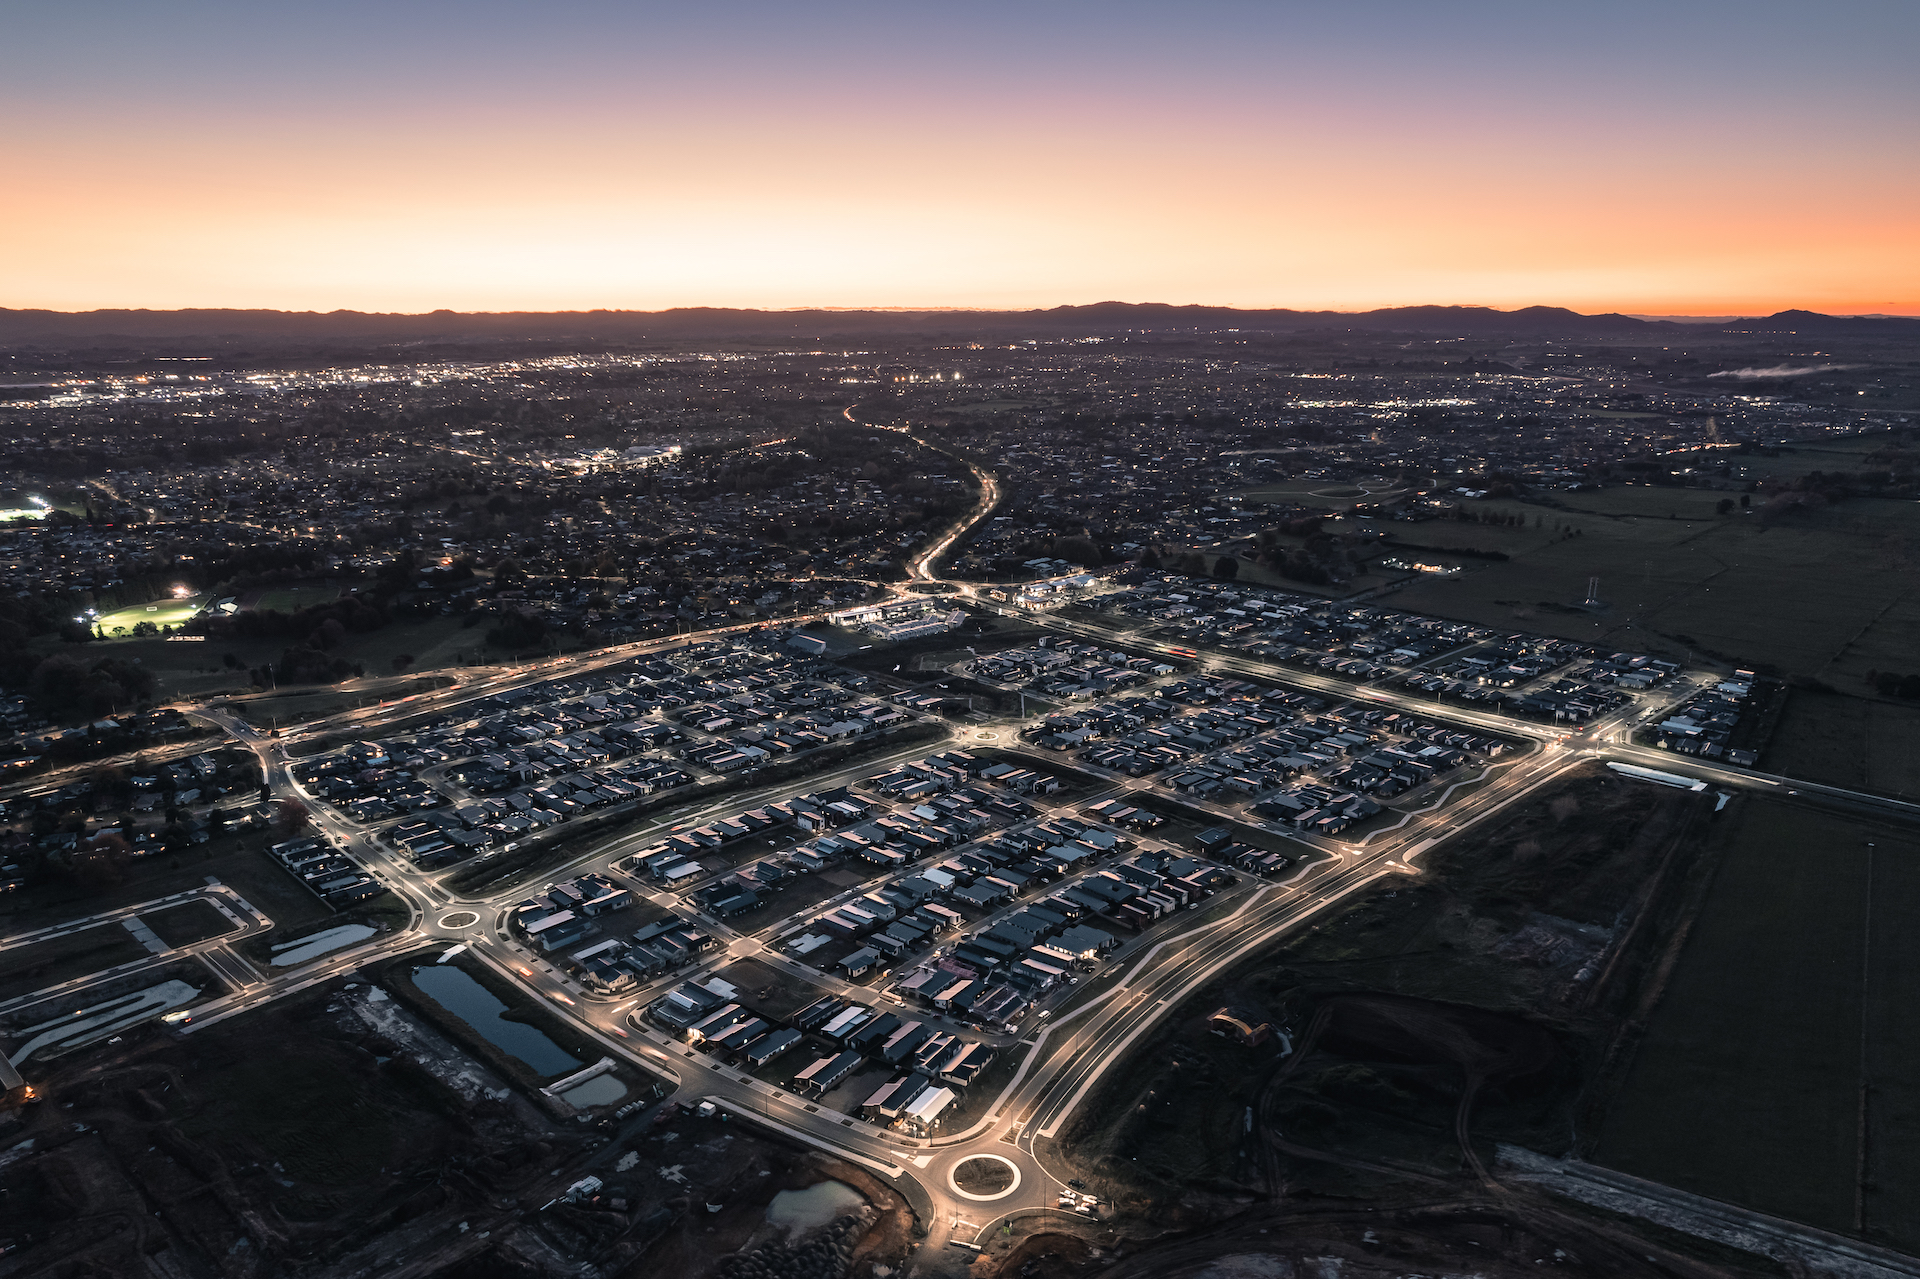 An aerial view of Greenhill at dusk, illuminated by ibex lighting.